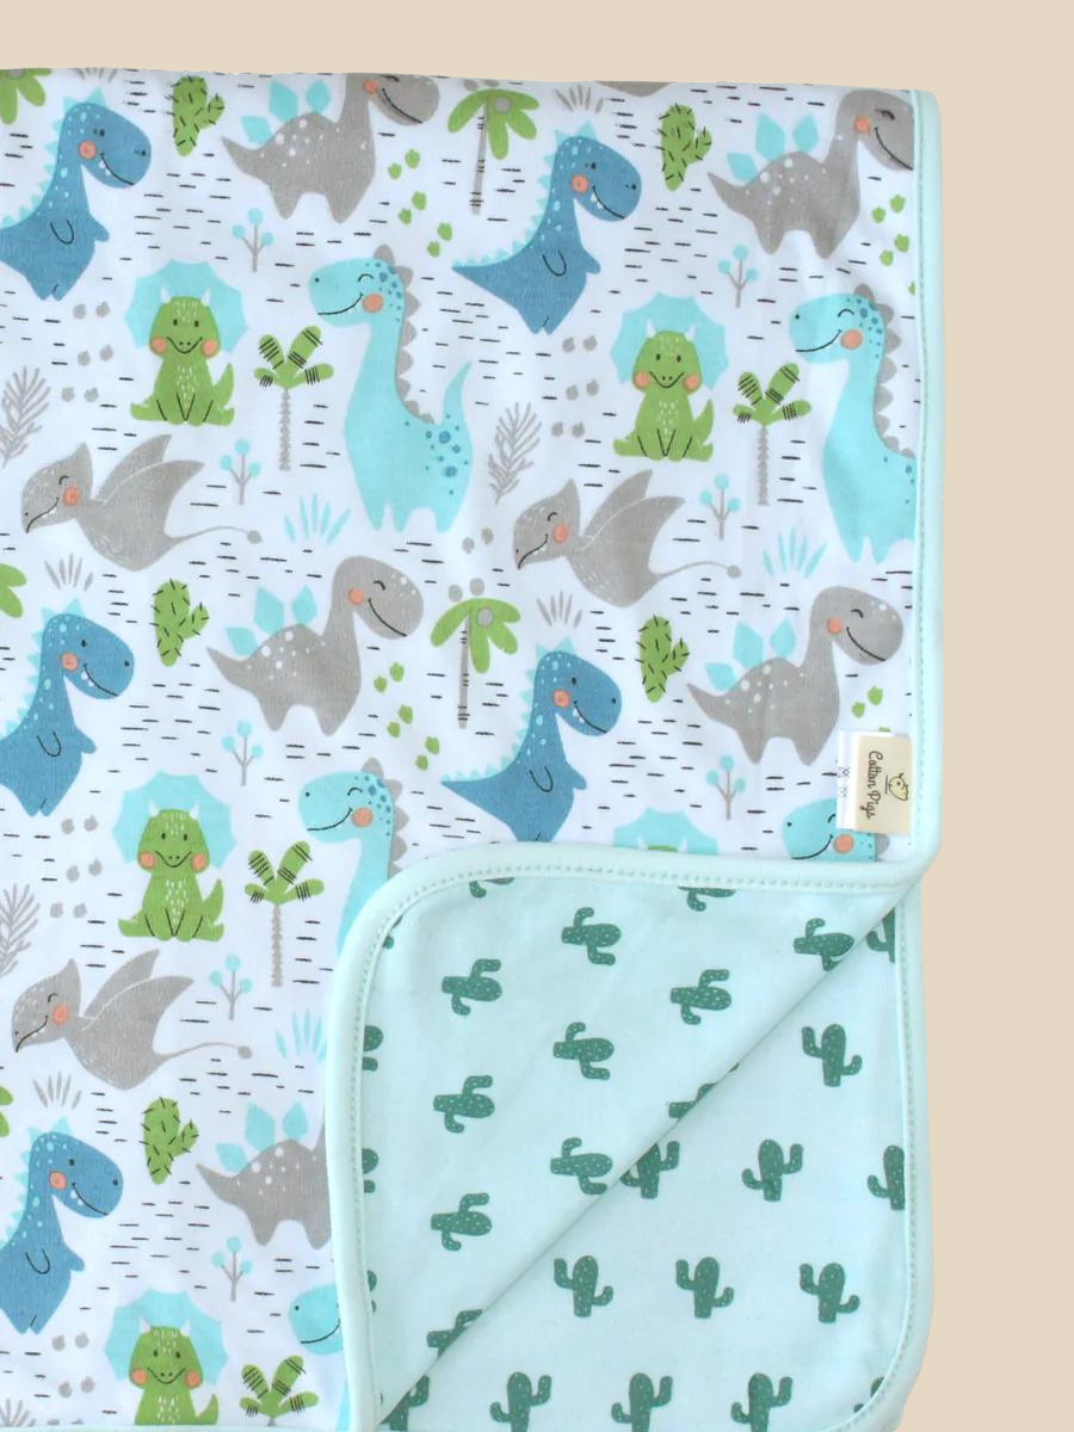 Our adorably printed organic blankets are super versatile and soft, suitable for all seasons or air-conditioned rooms. The recommended temperatures for using this blanket is between 20-30°C.